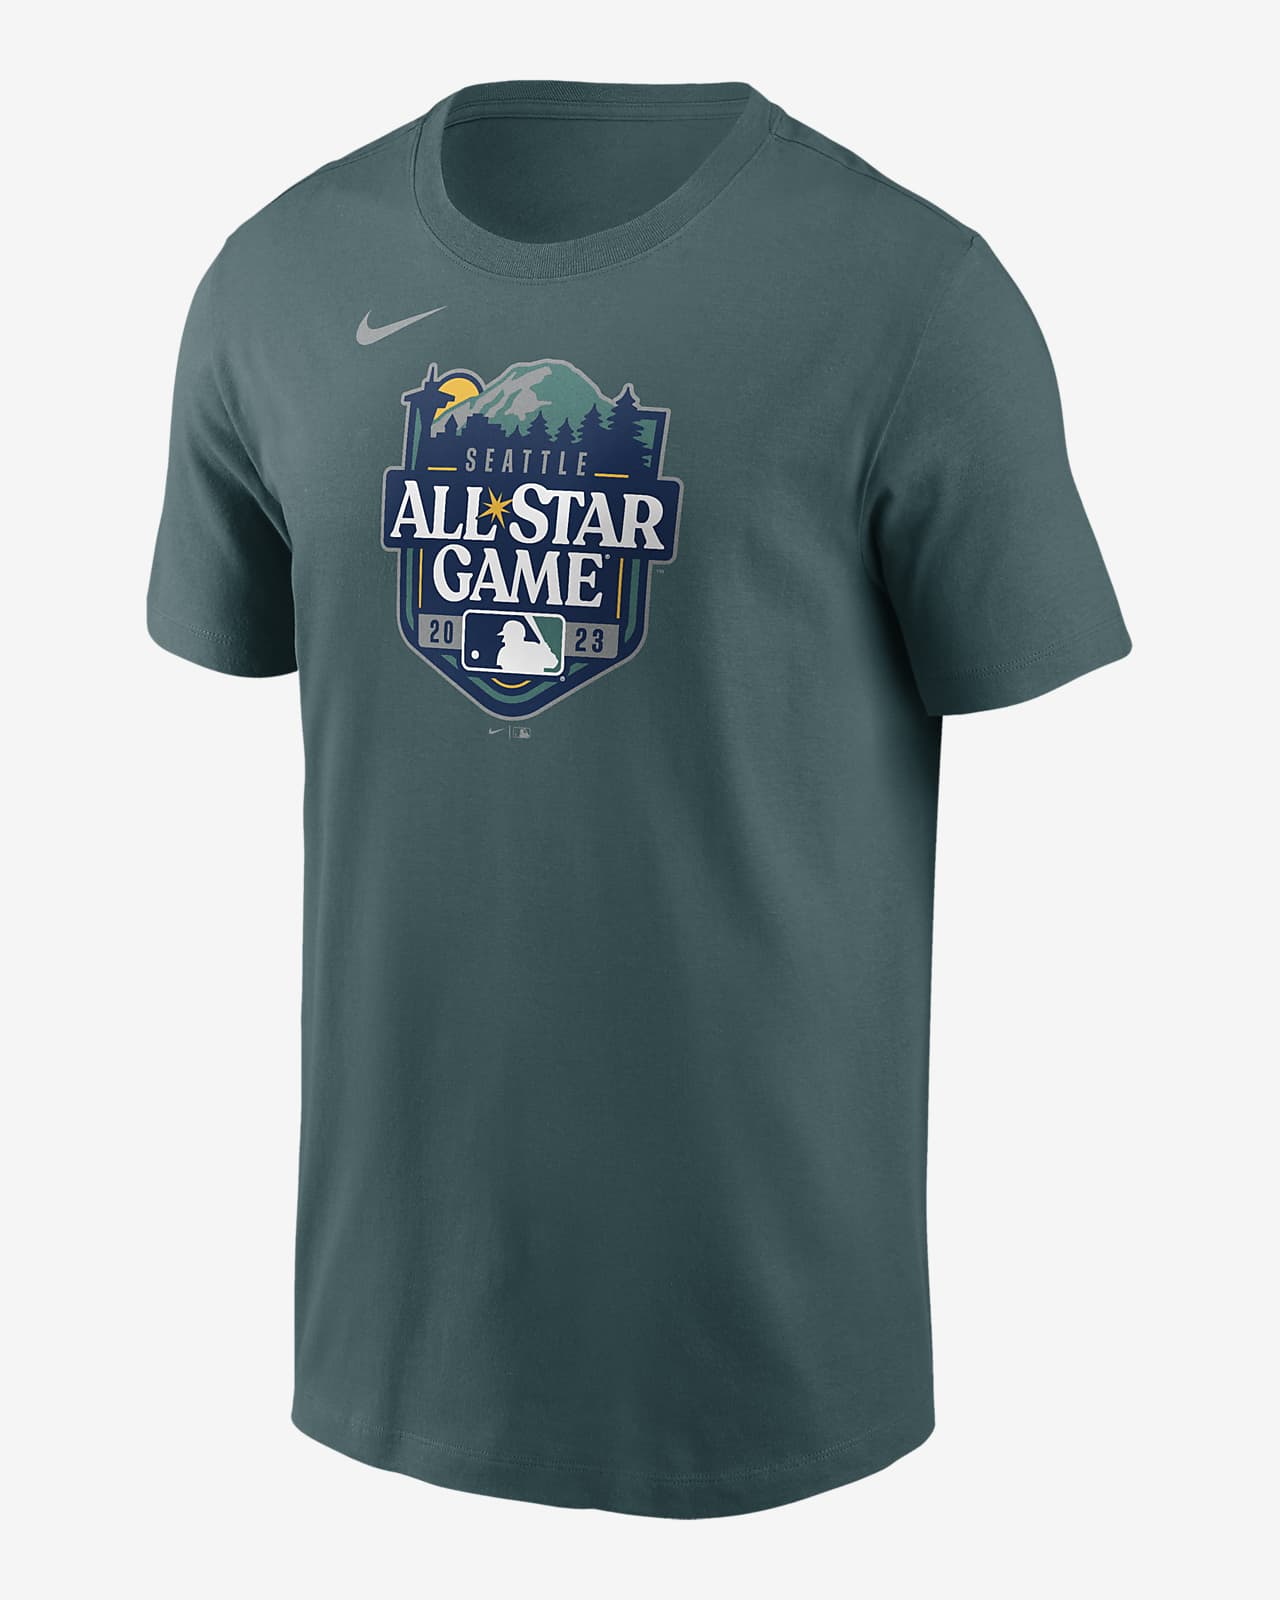 Official MLB All Star Game Hats, MLB All Star Game Collection, All Star  Game Jerseys, Gear